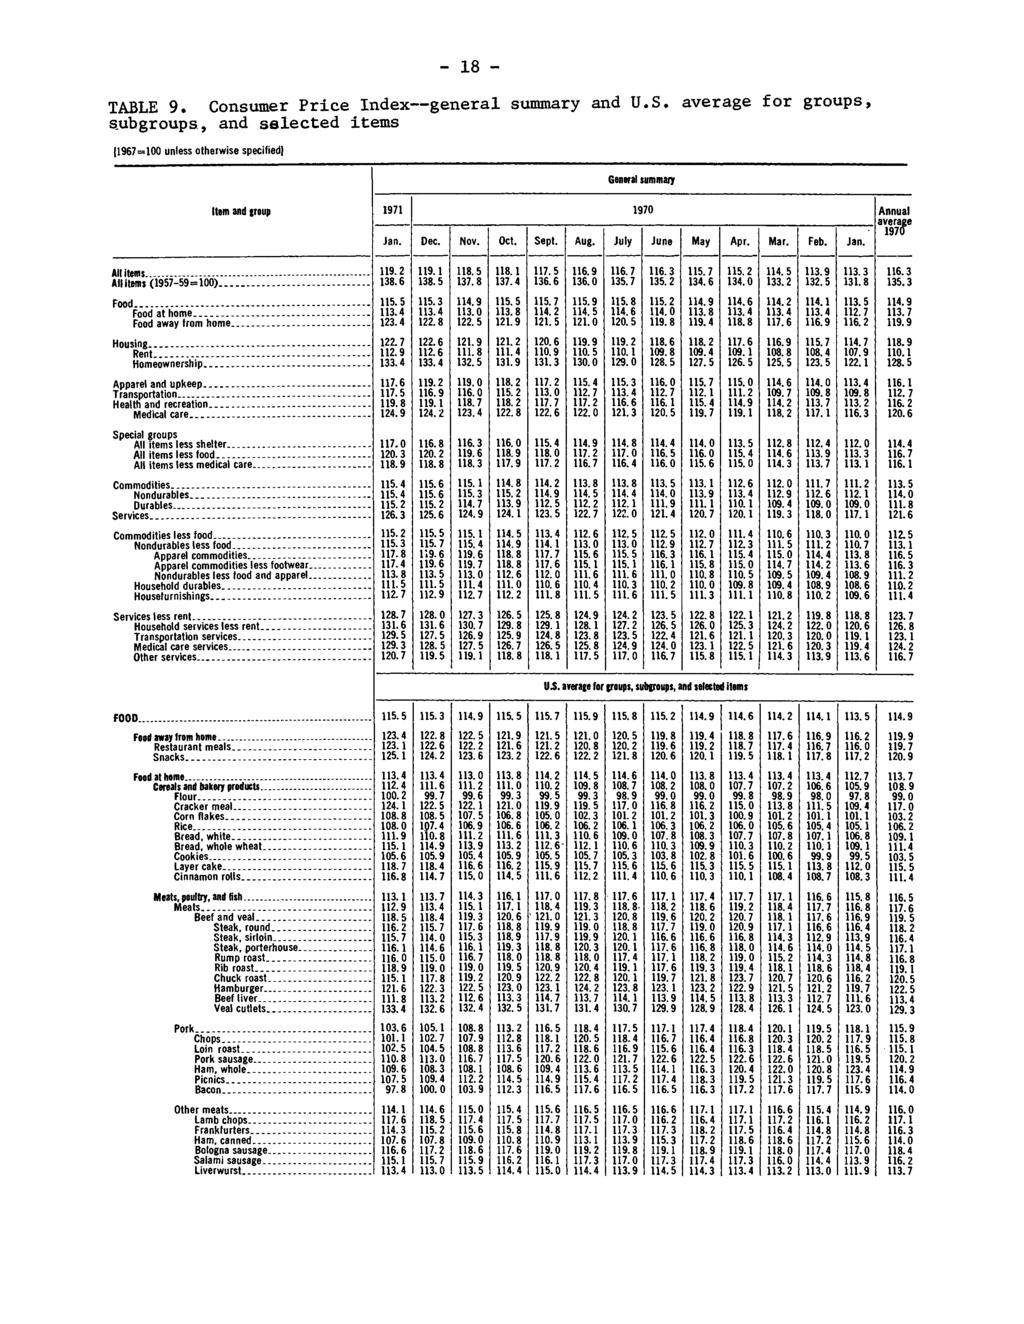 18 TABLE 9. Consumer Price Index general summary and U.S. average for groups, subgroups, and selected items [1967=1 unless otherwise specified] General summary Item and group 1971 Jan. 197 Dec. Nov.